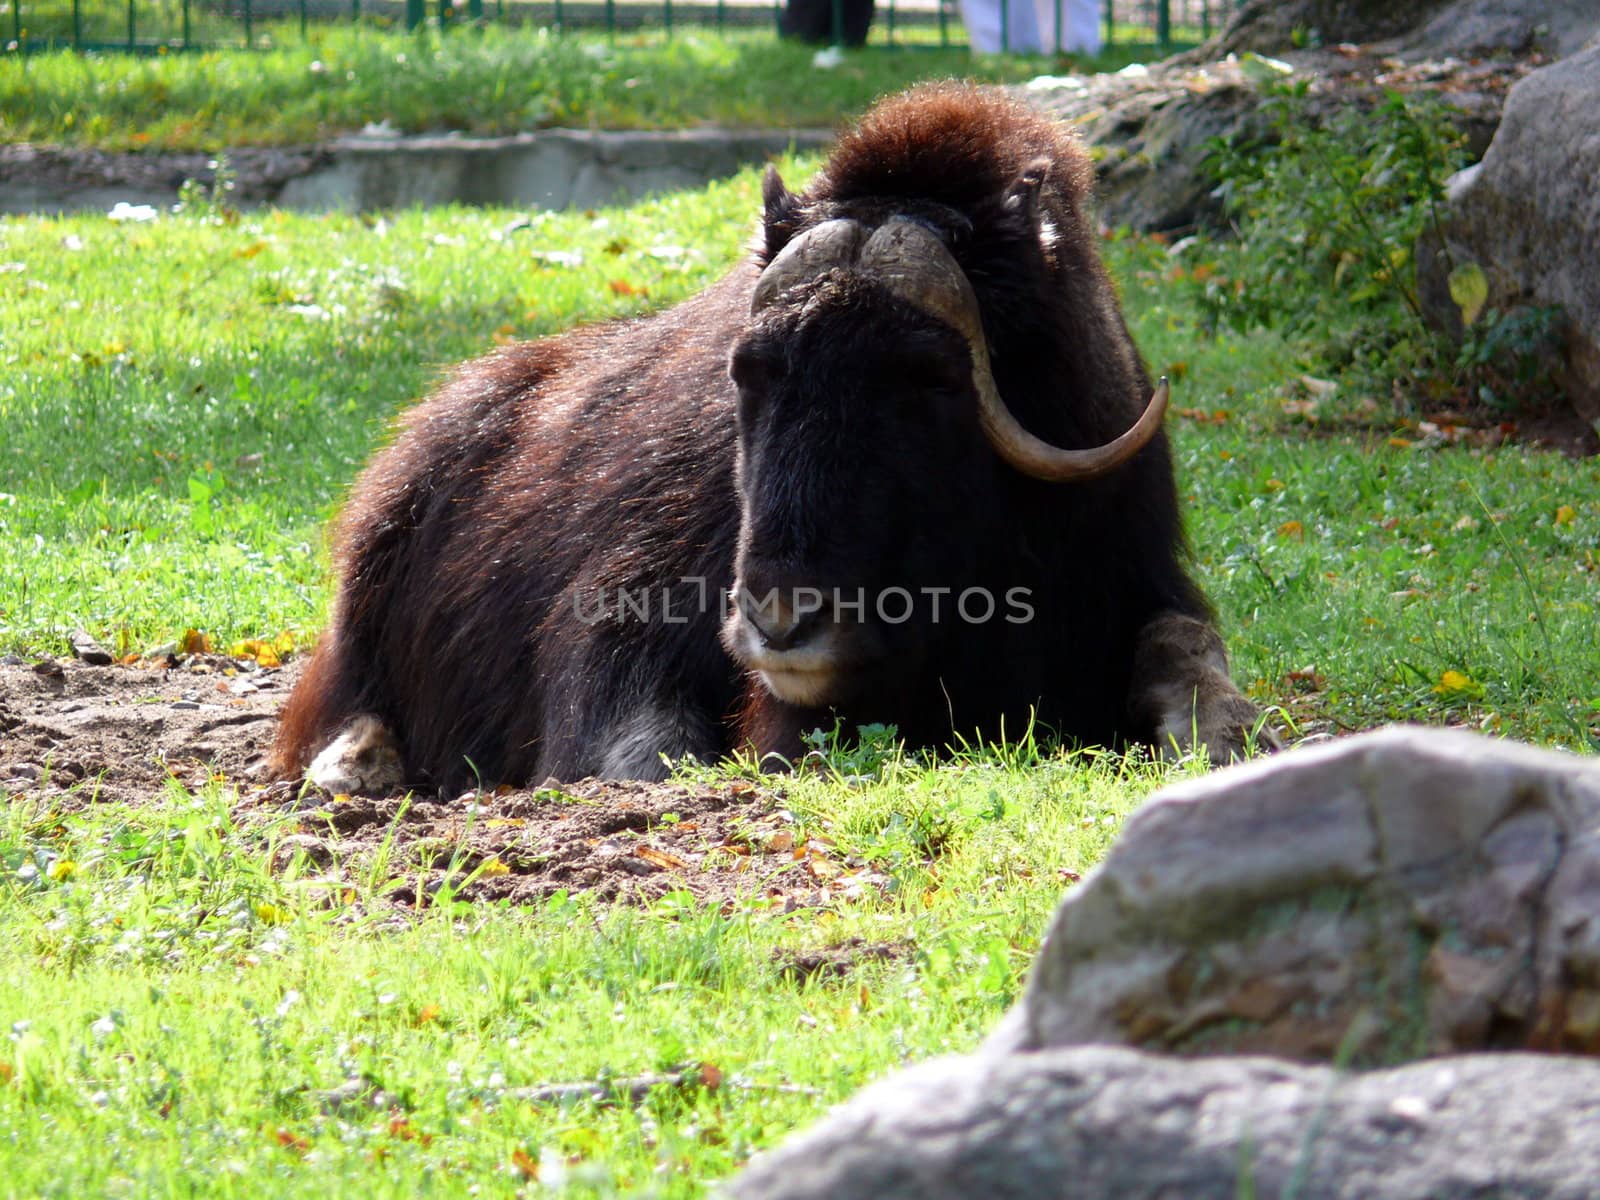 Muskox in Moscow zoo by Stoyanov